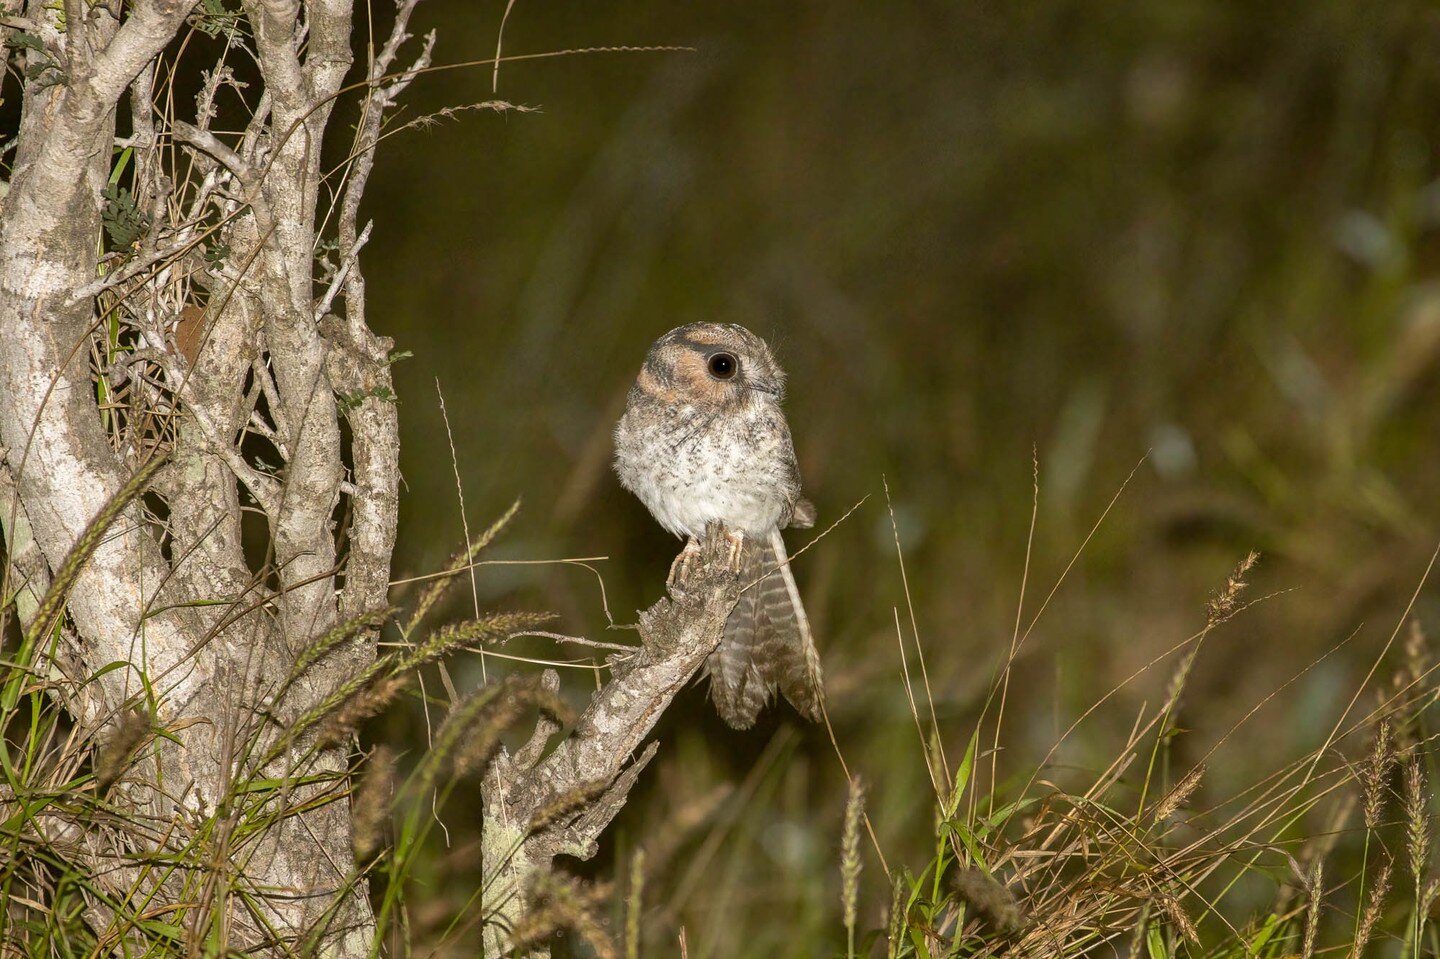 I saw some awesome critters while spotlighting near Moranbah last week, including this adorable Australian Owlet-Nightjar. They're so tiny - they look like tennis balls with tails! 🥰 Swipe to also see:
- Krefft's Glider
- Green Tree Frog in a log
- 